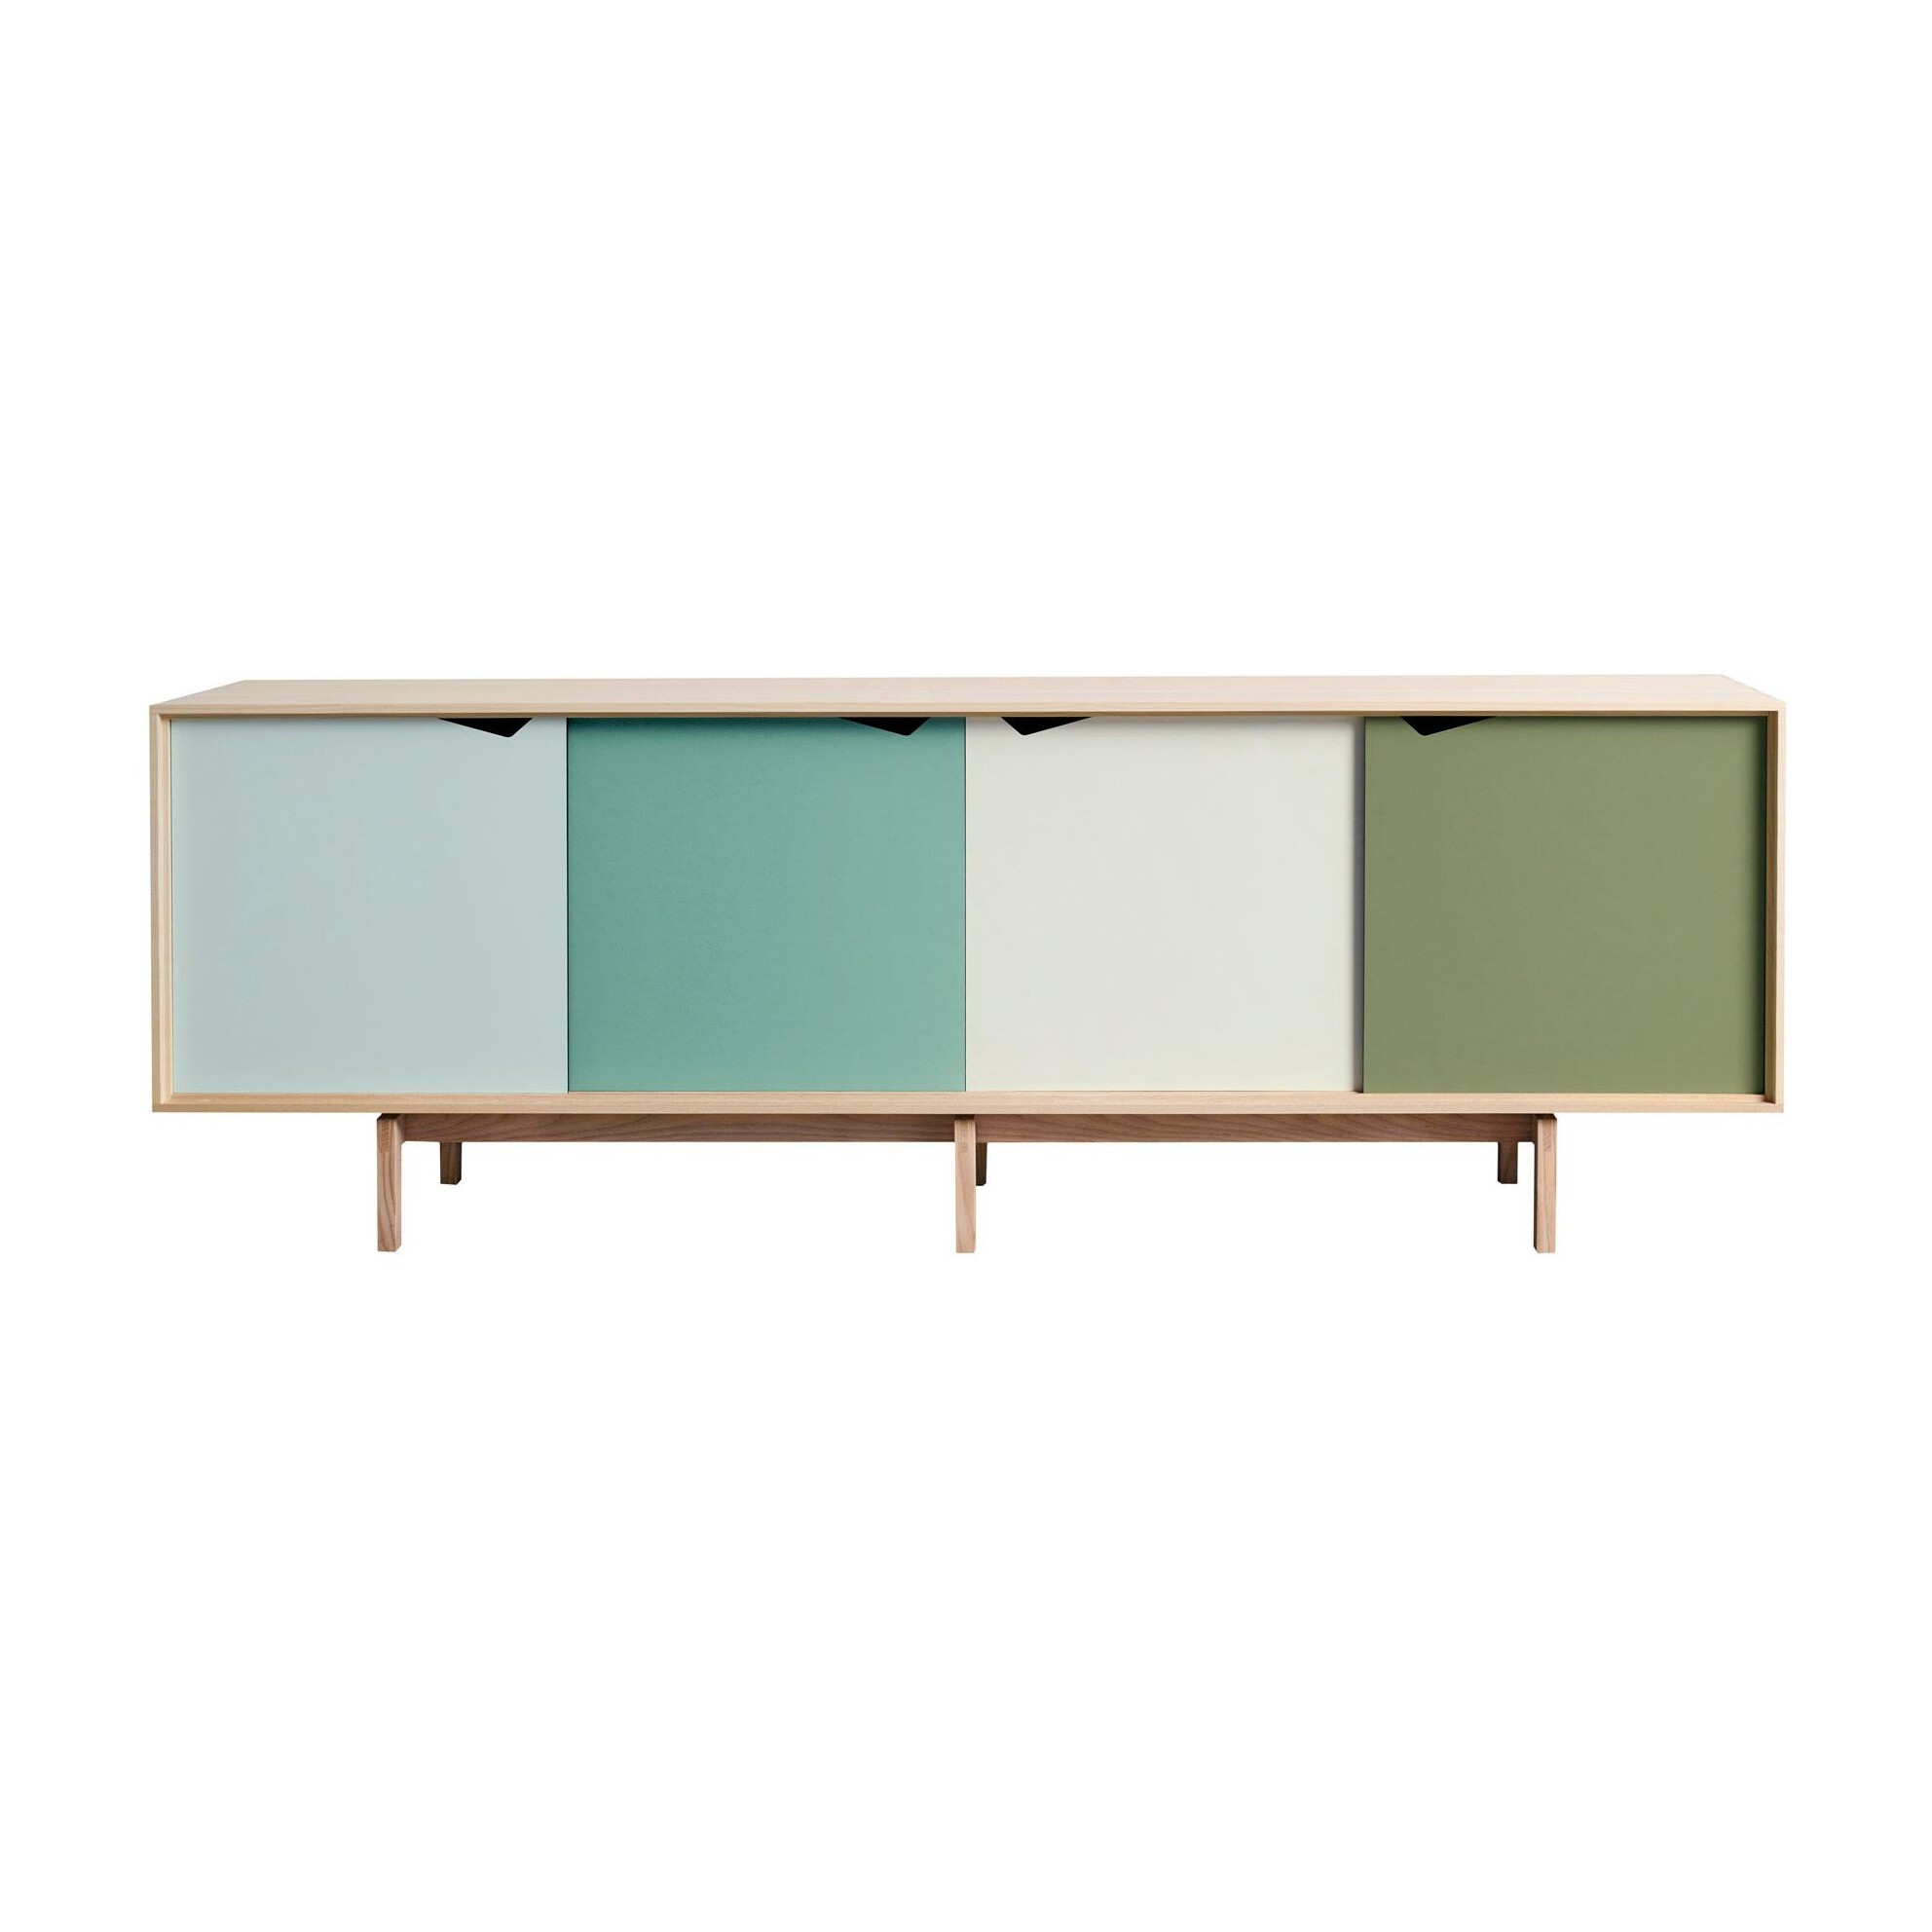 Featured image of post Sideboard Wildeiche 200 Cm B h t 180 x 88 4 x 45 cm